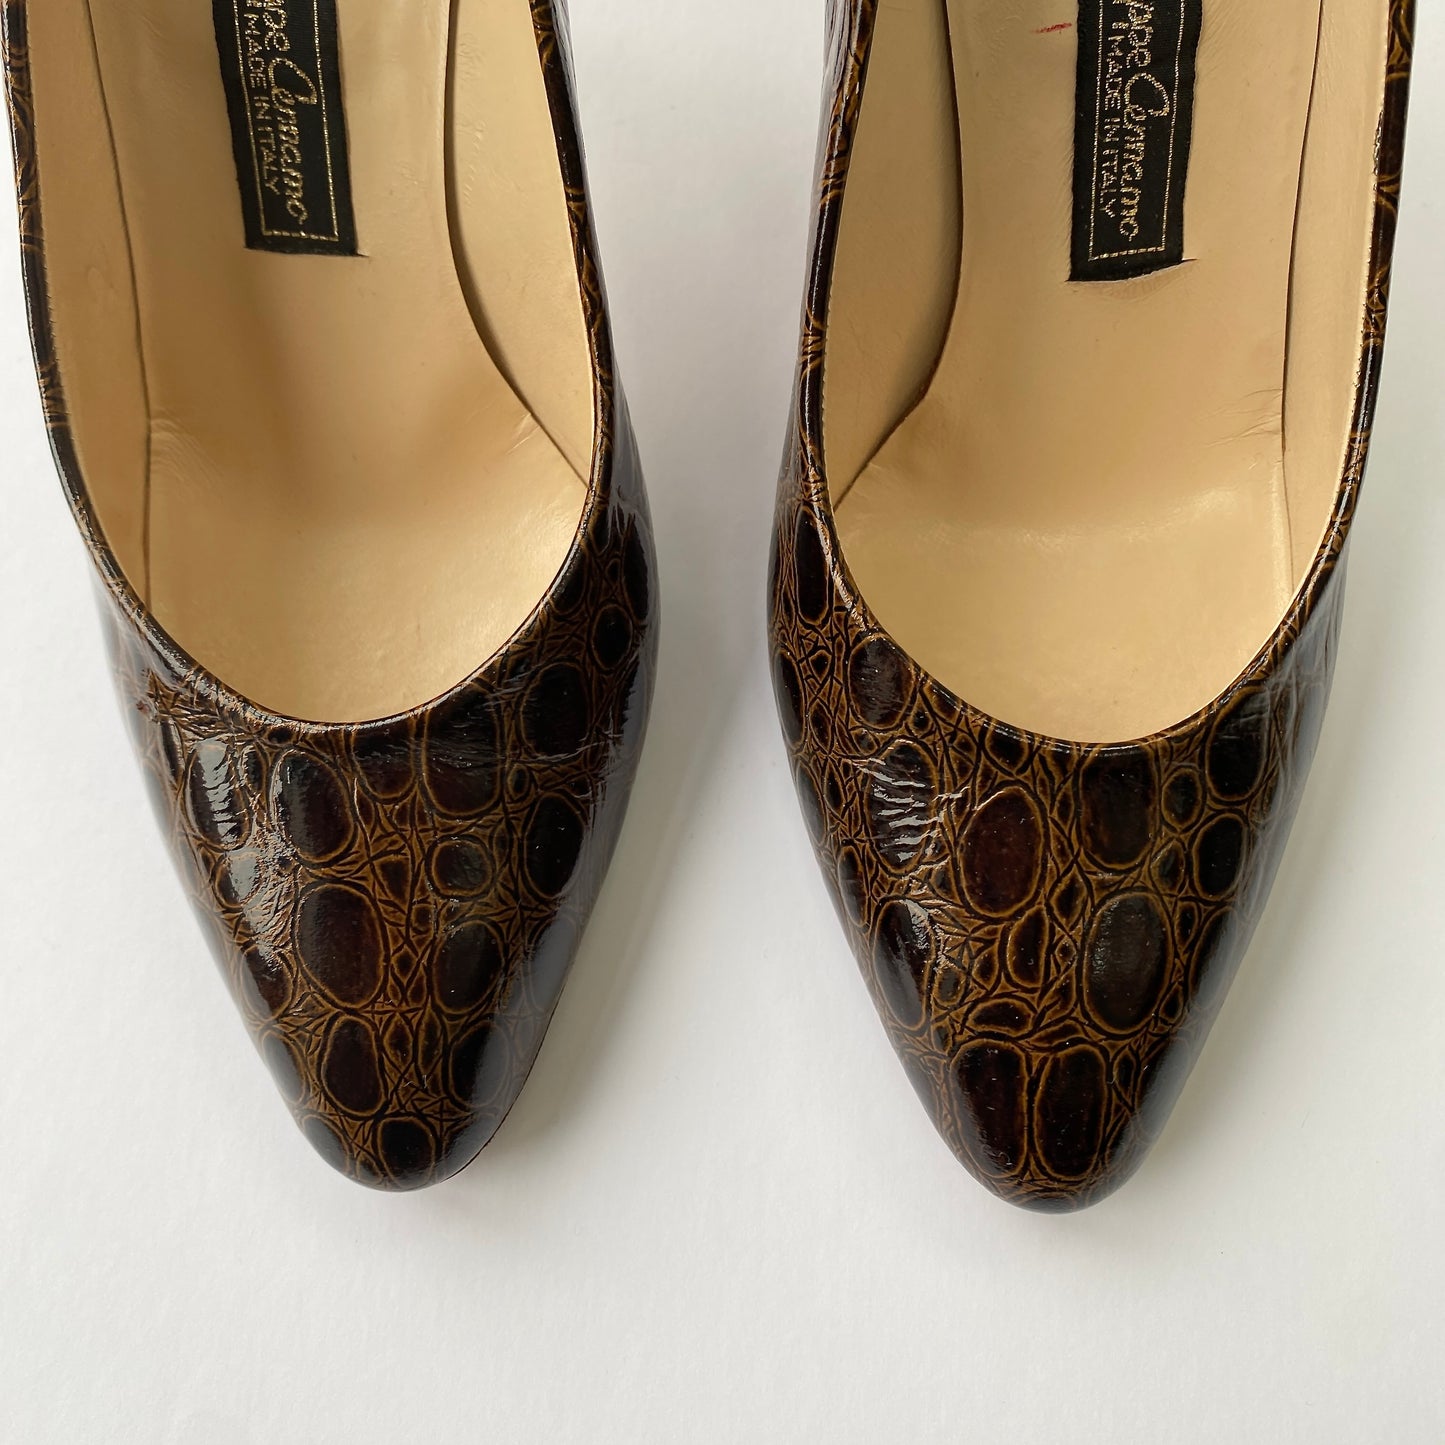 Brown Leather Court Shoes